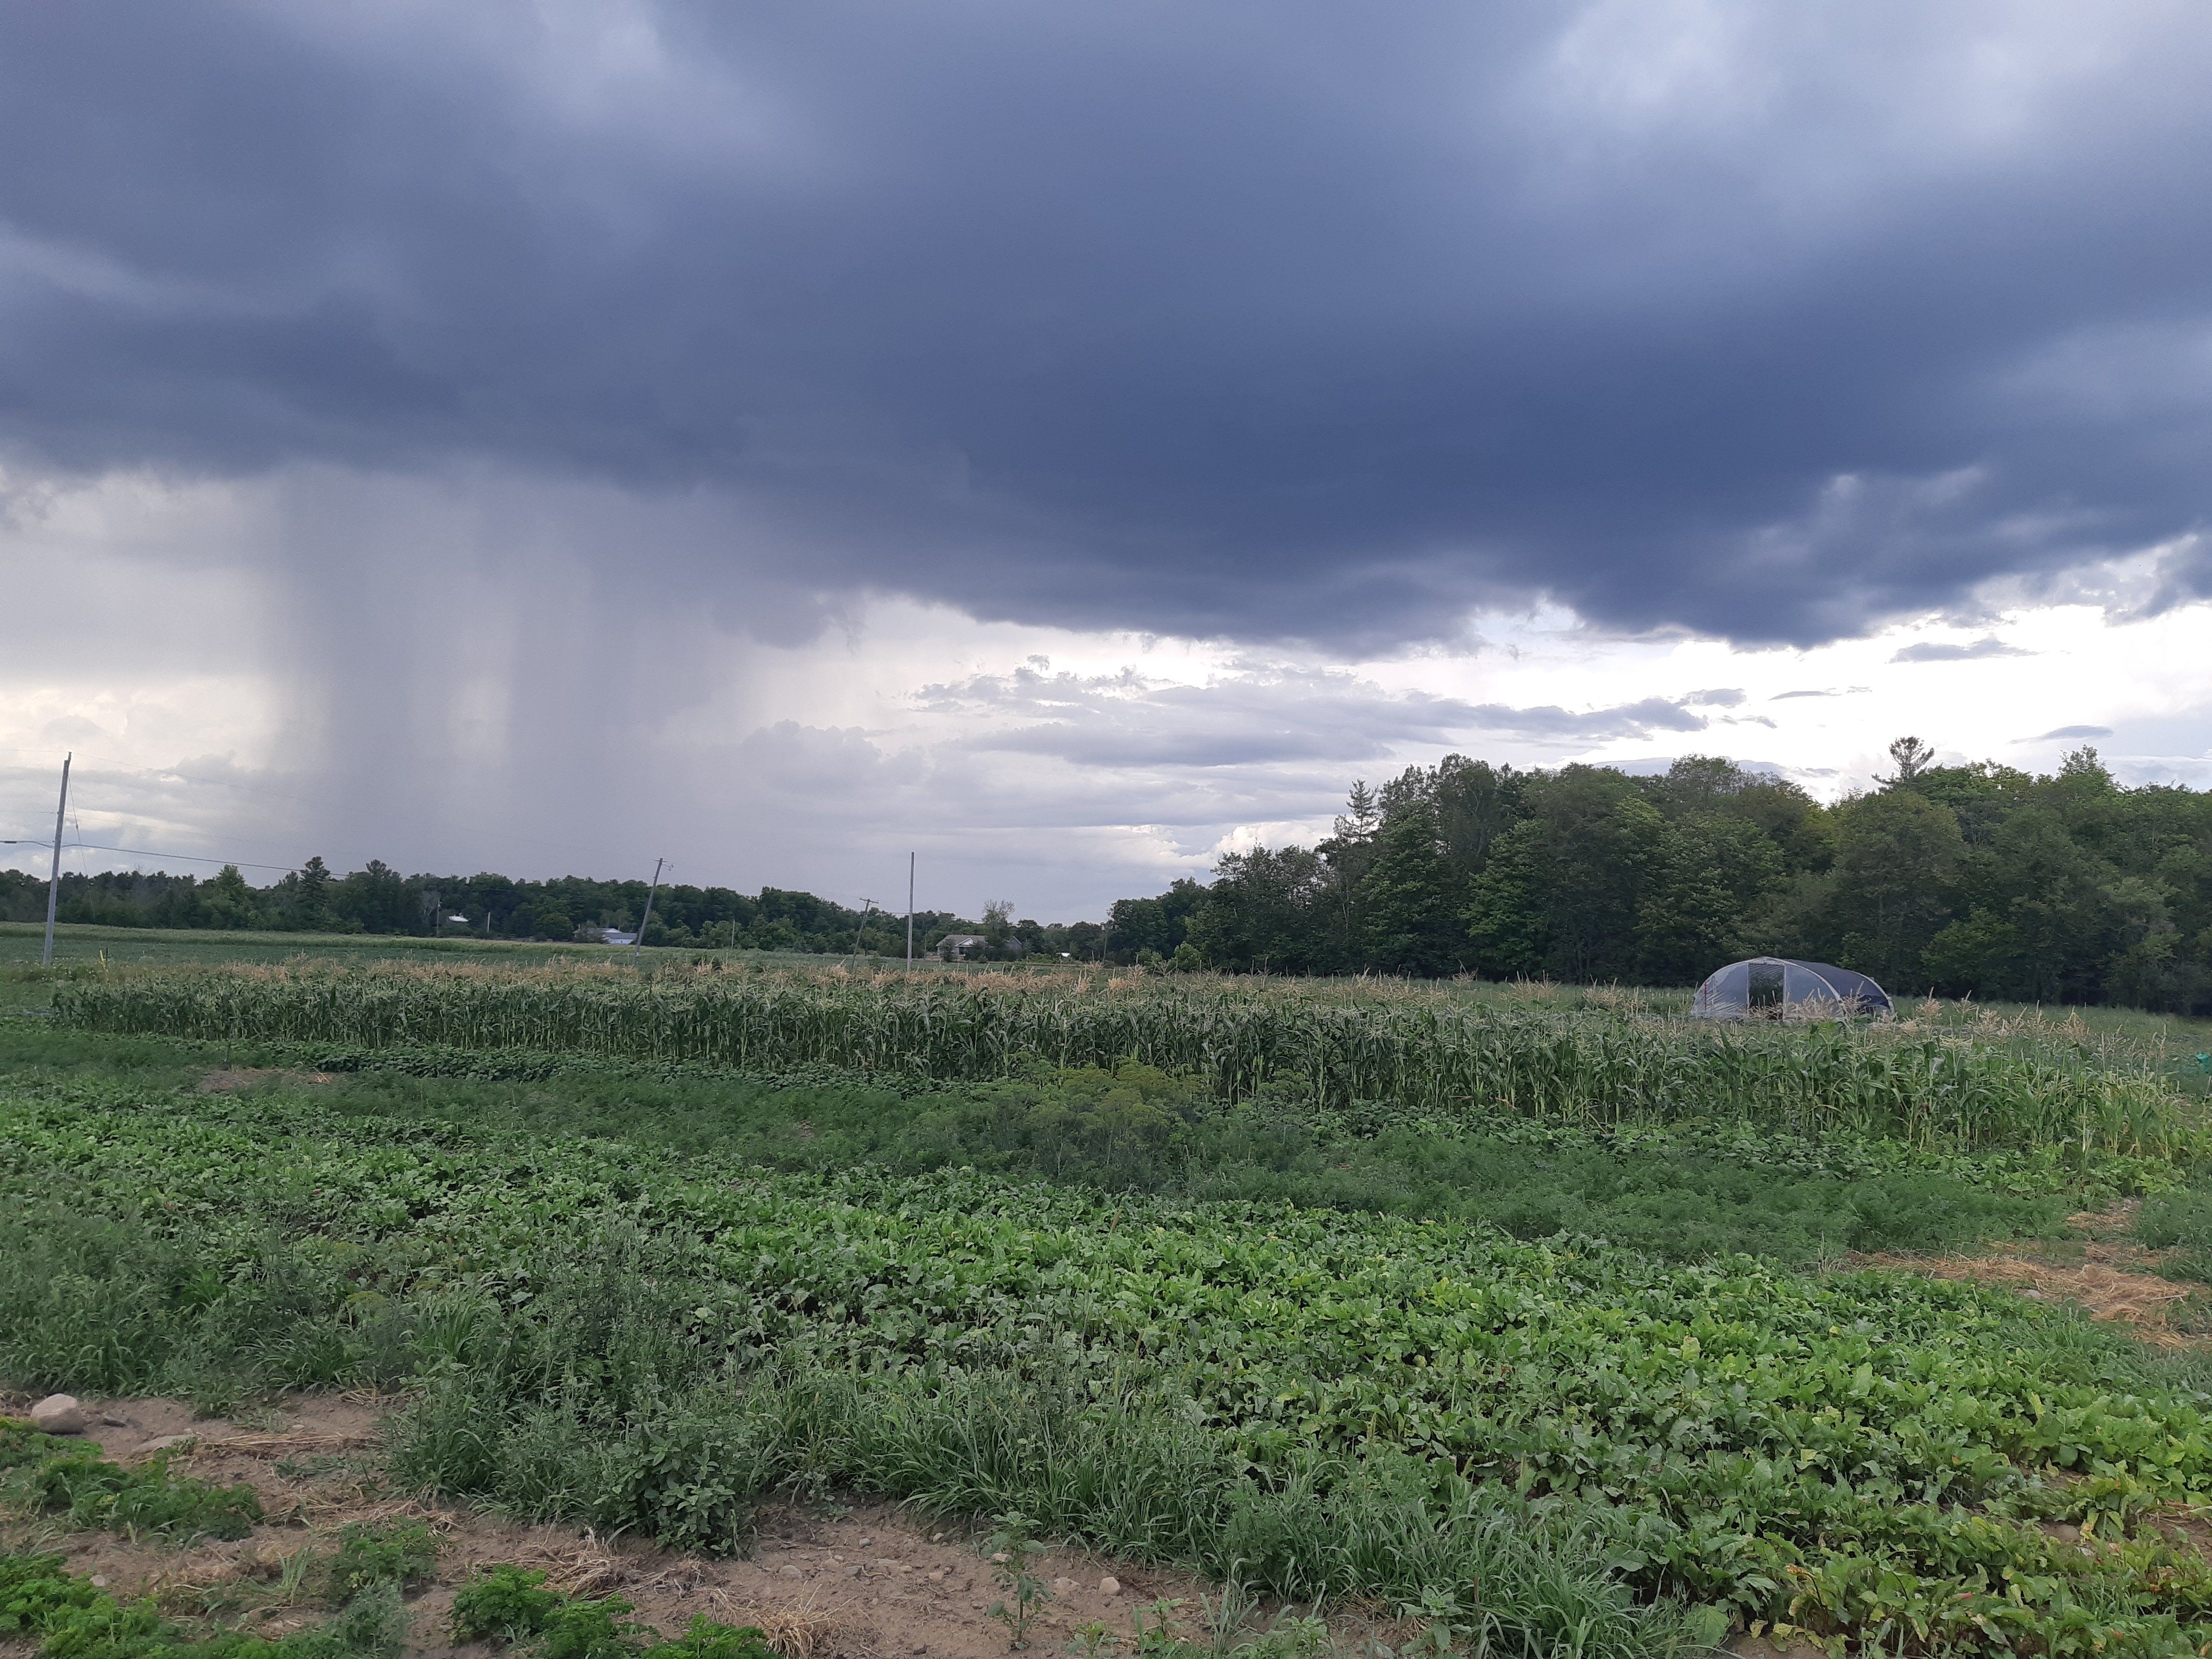 Previous Happening: Farm Happenings for August 6, 2020